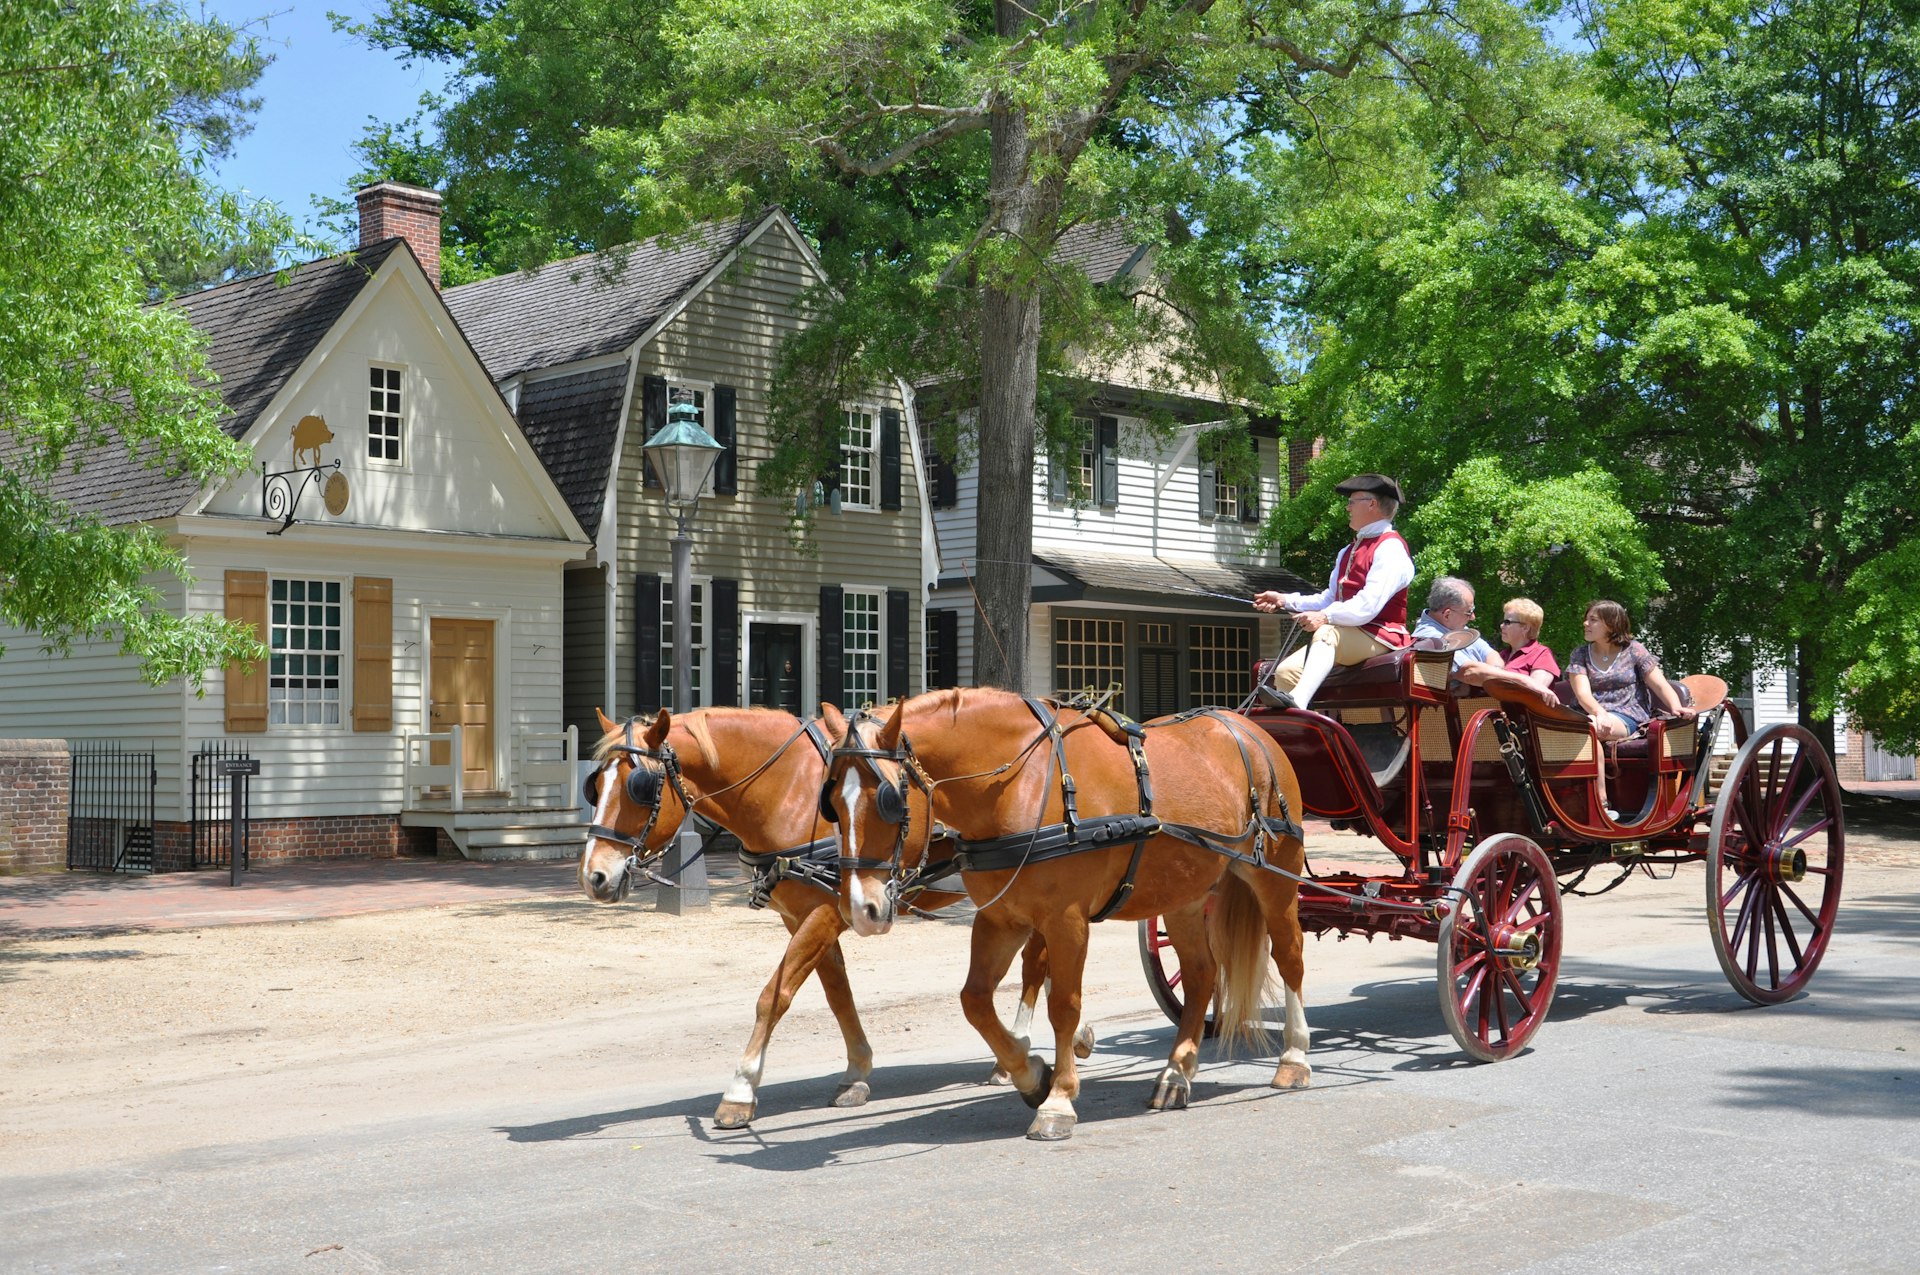 Horse drawn carriage tours in British Colony in Williamsburg, Virginia, USA.